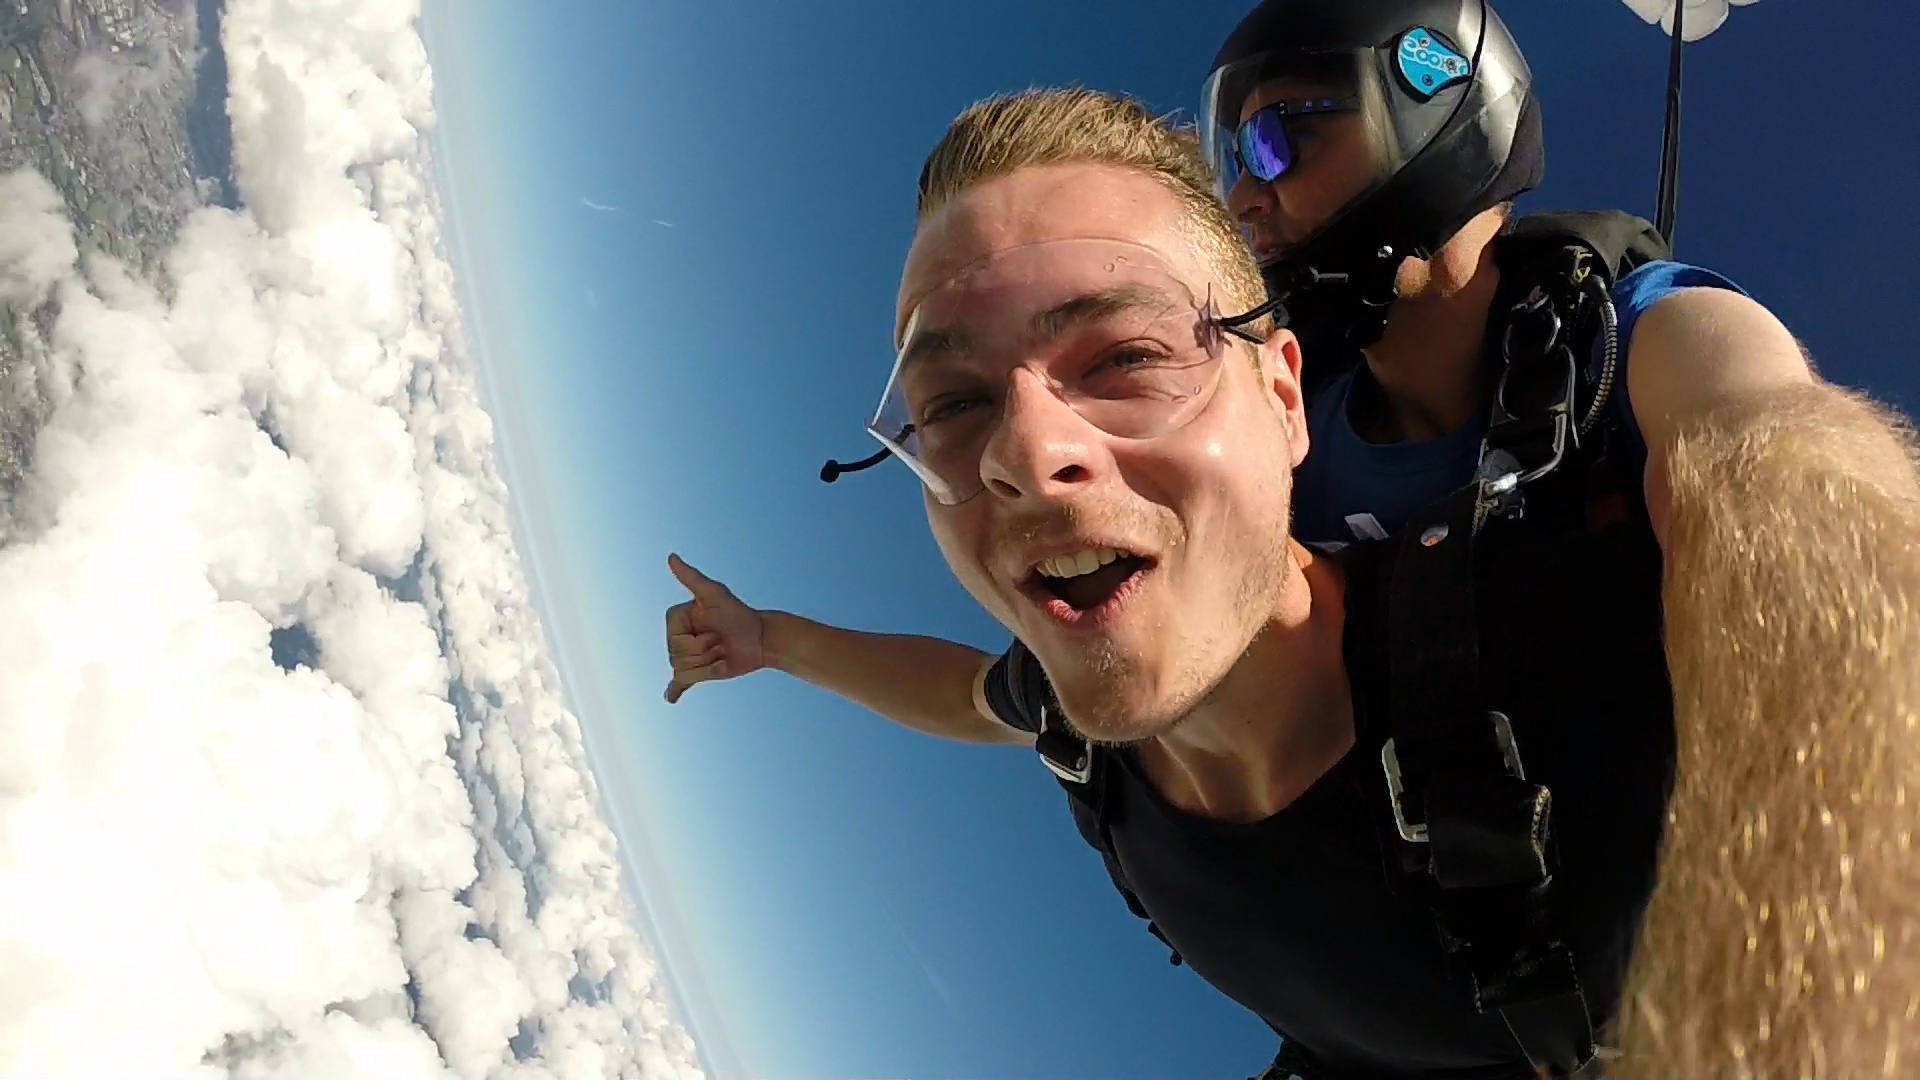 Skydive Sydney- High above the clouds